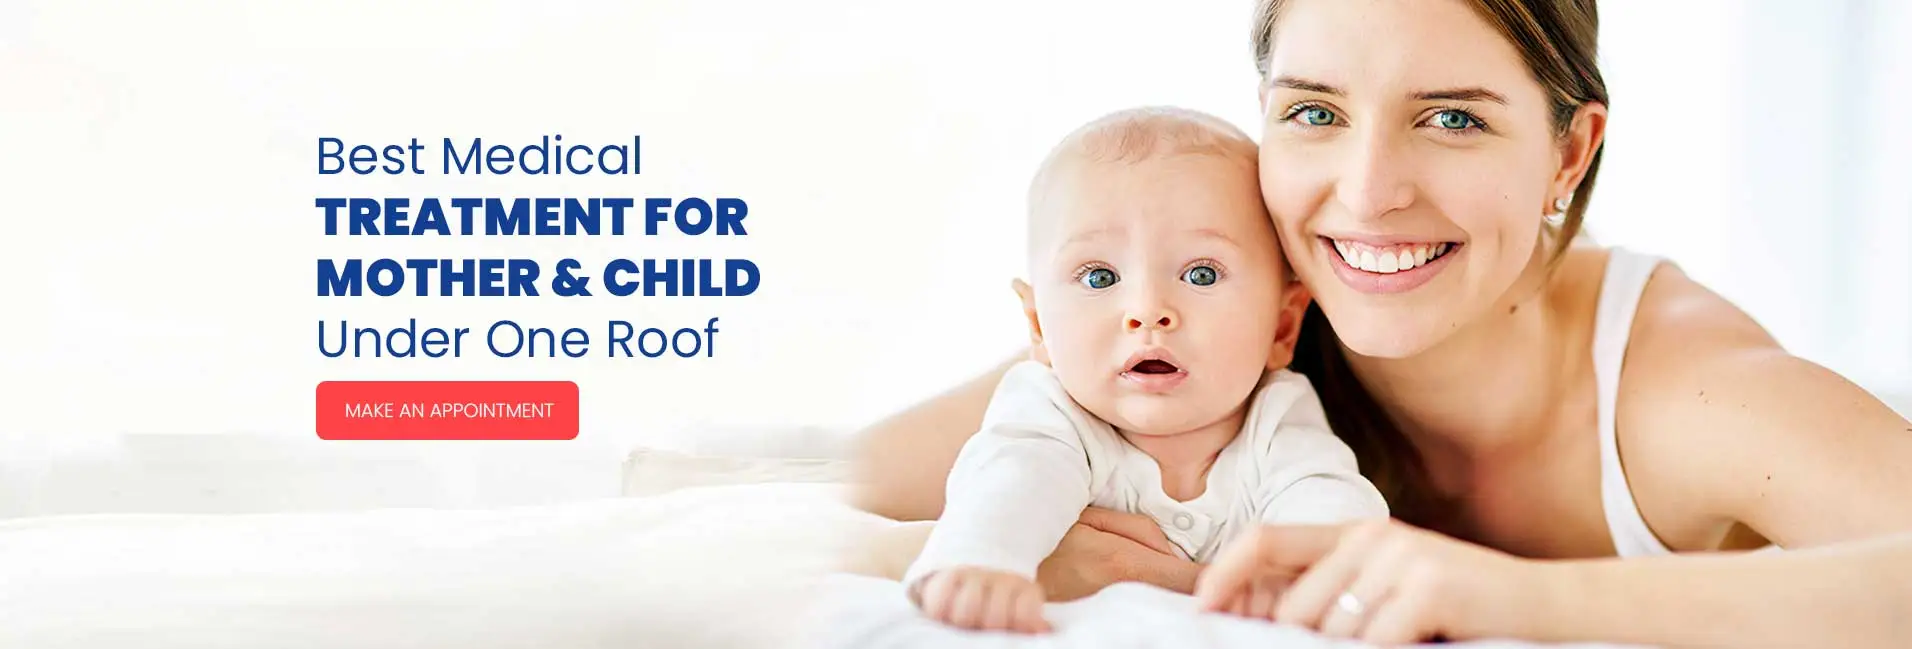 Best Medical Treatment For Mother & Child Under One Roof